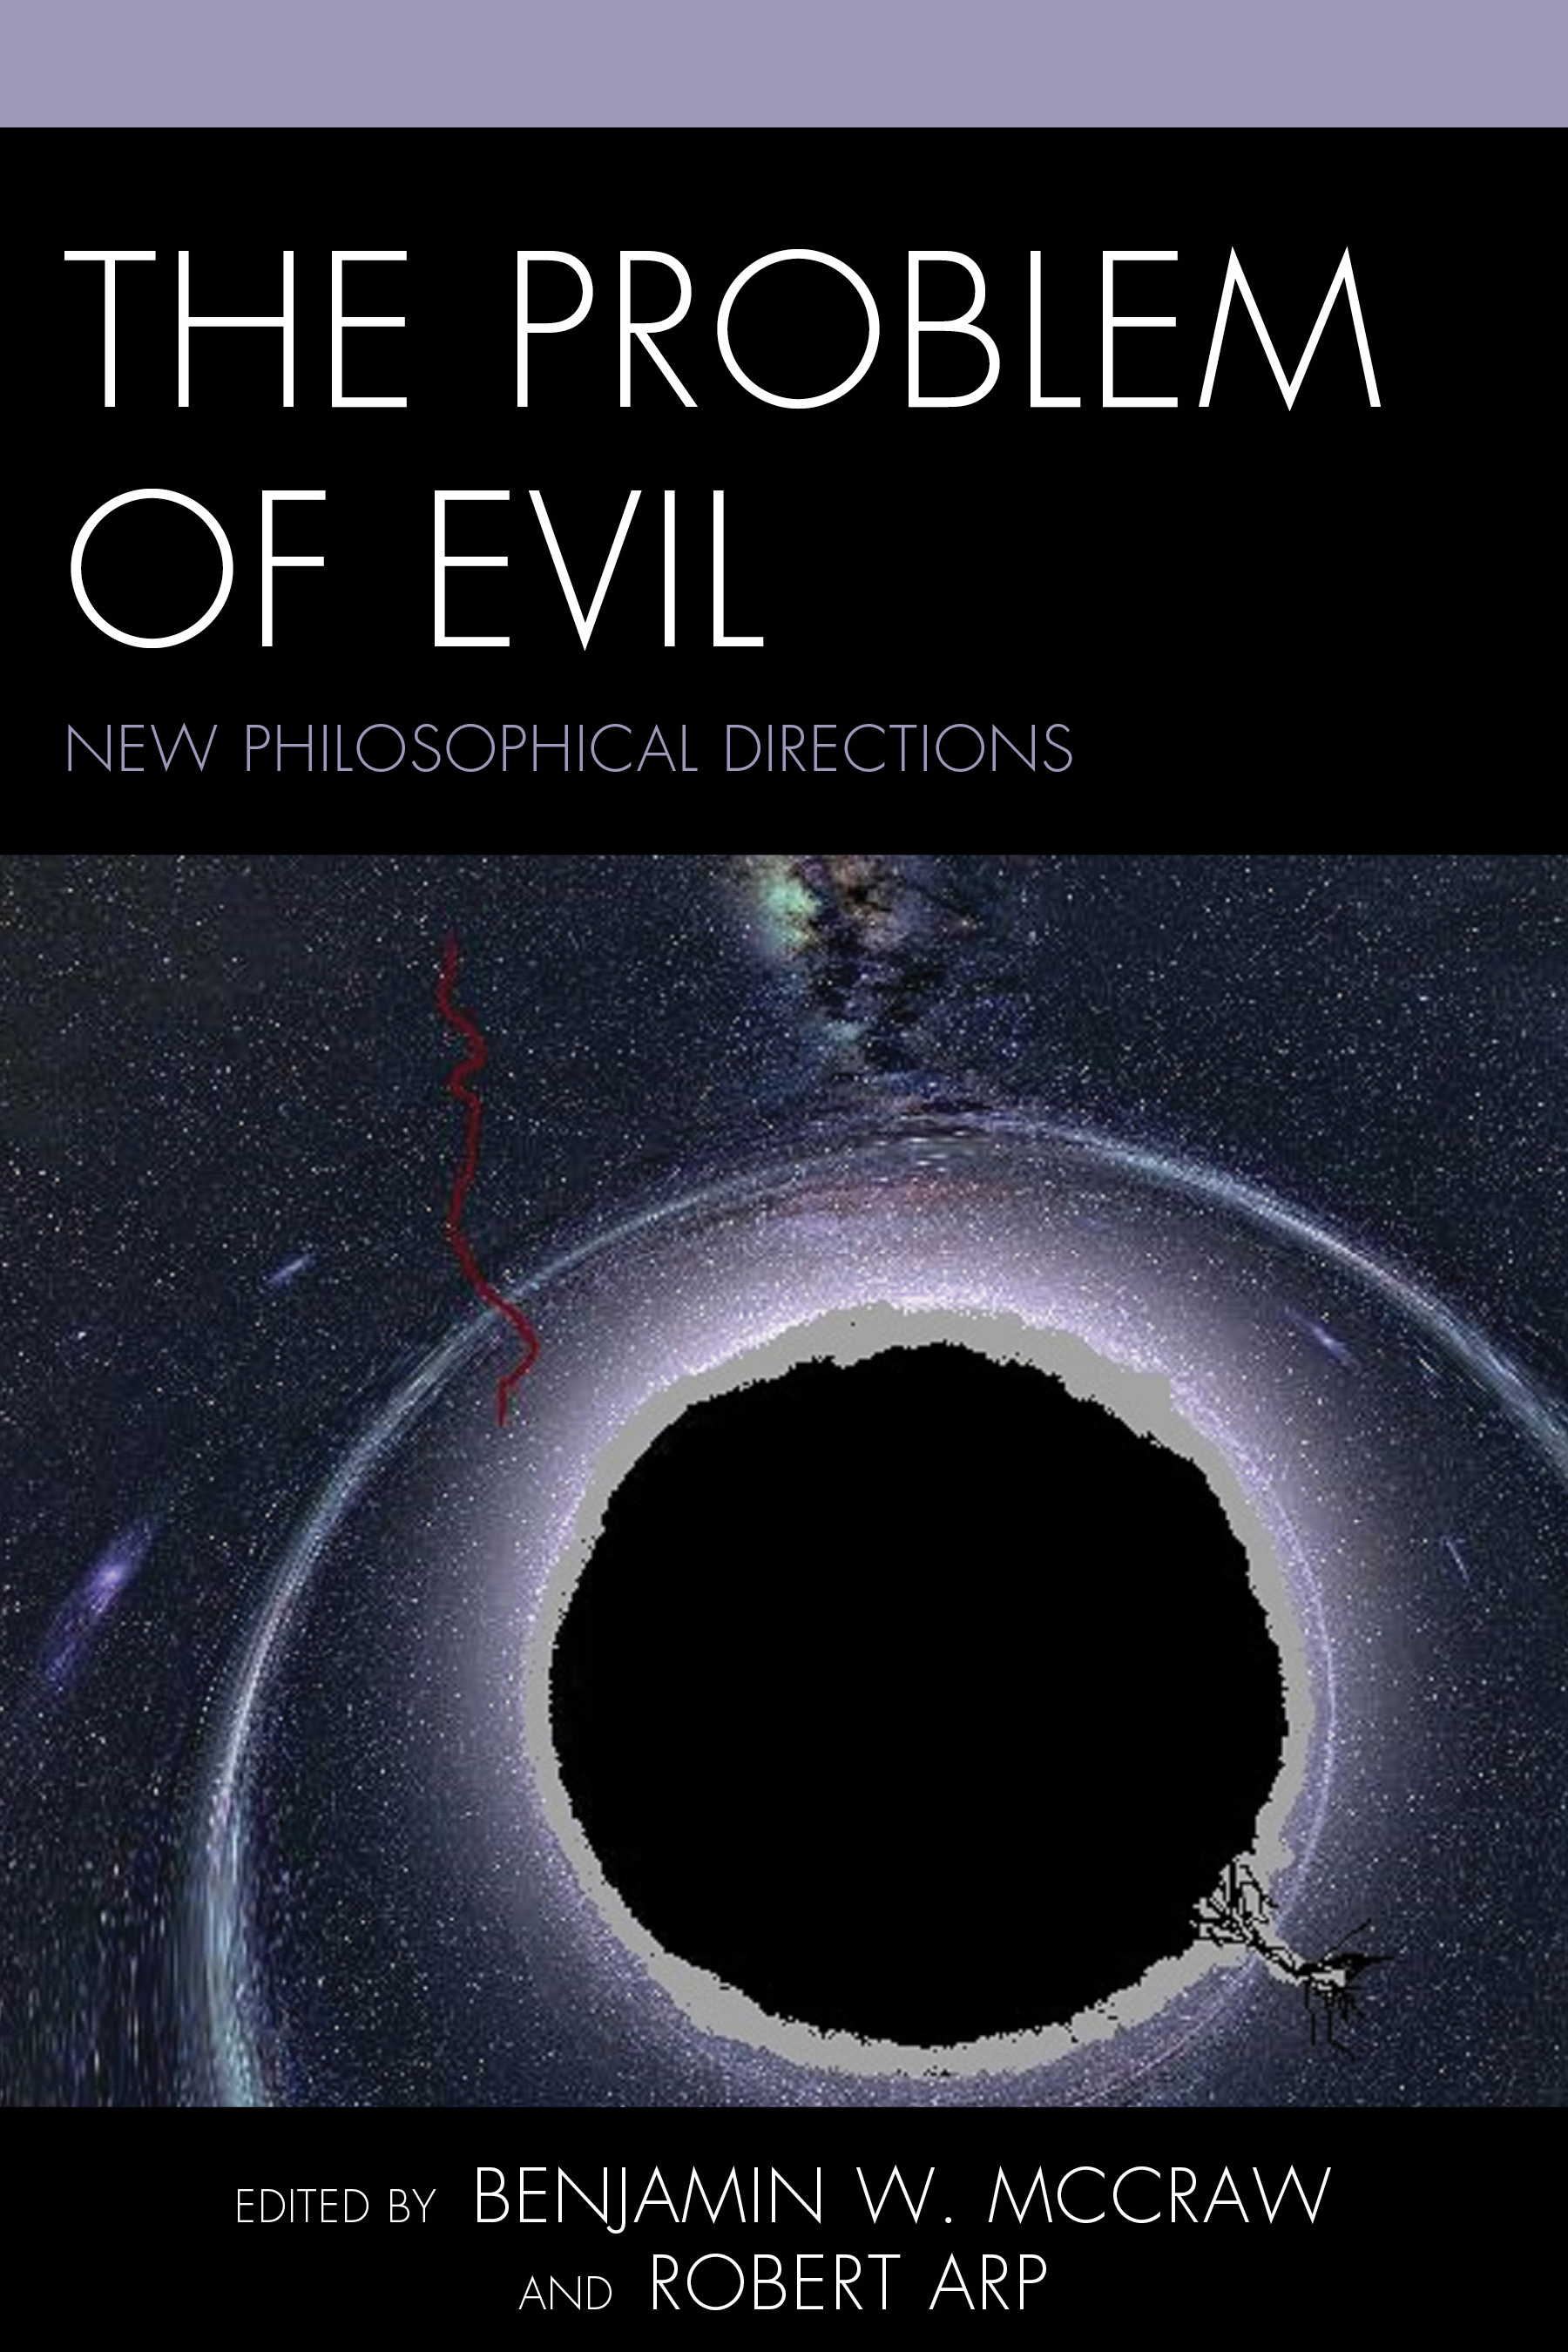 The Problem of Evil: New Philosophical Directions